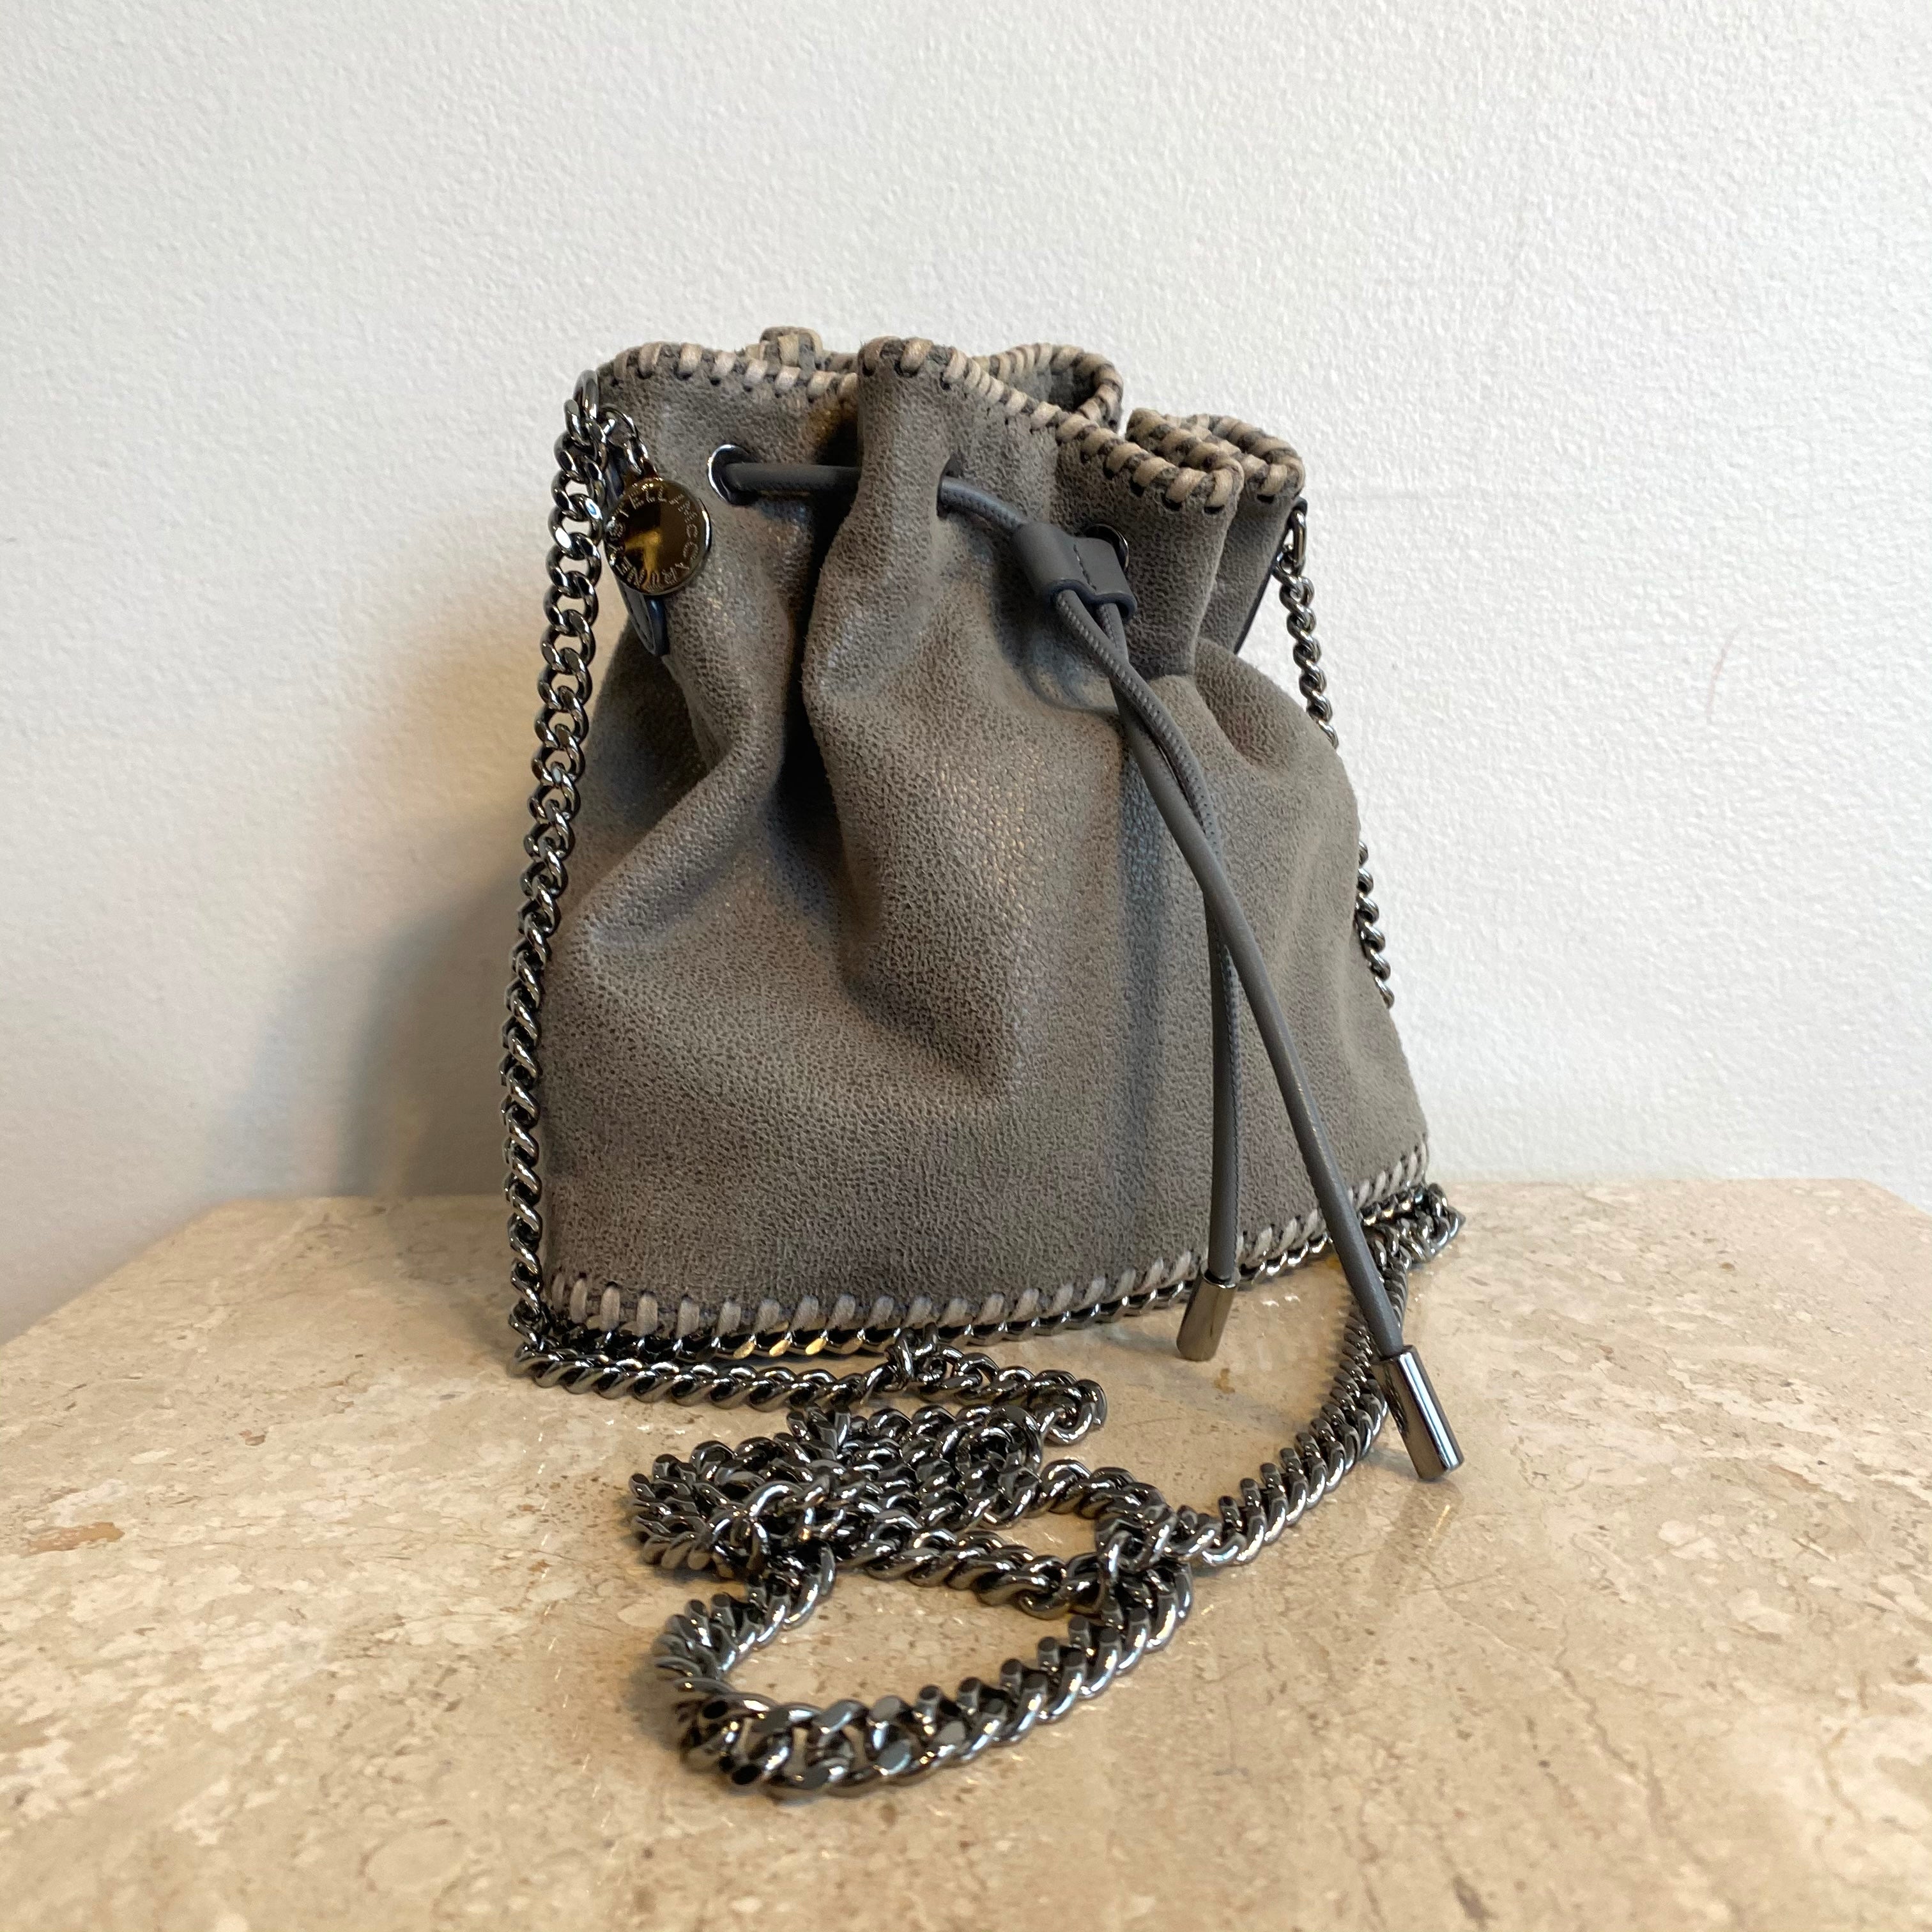 How To Spot A Real Stella McCartney Falabella Bag